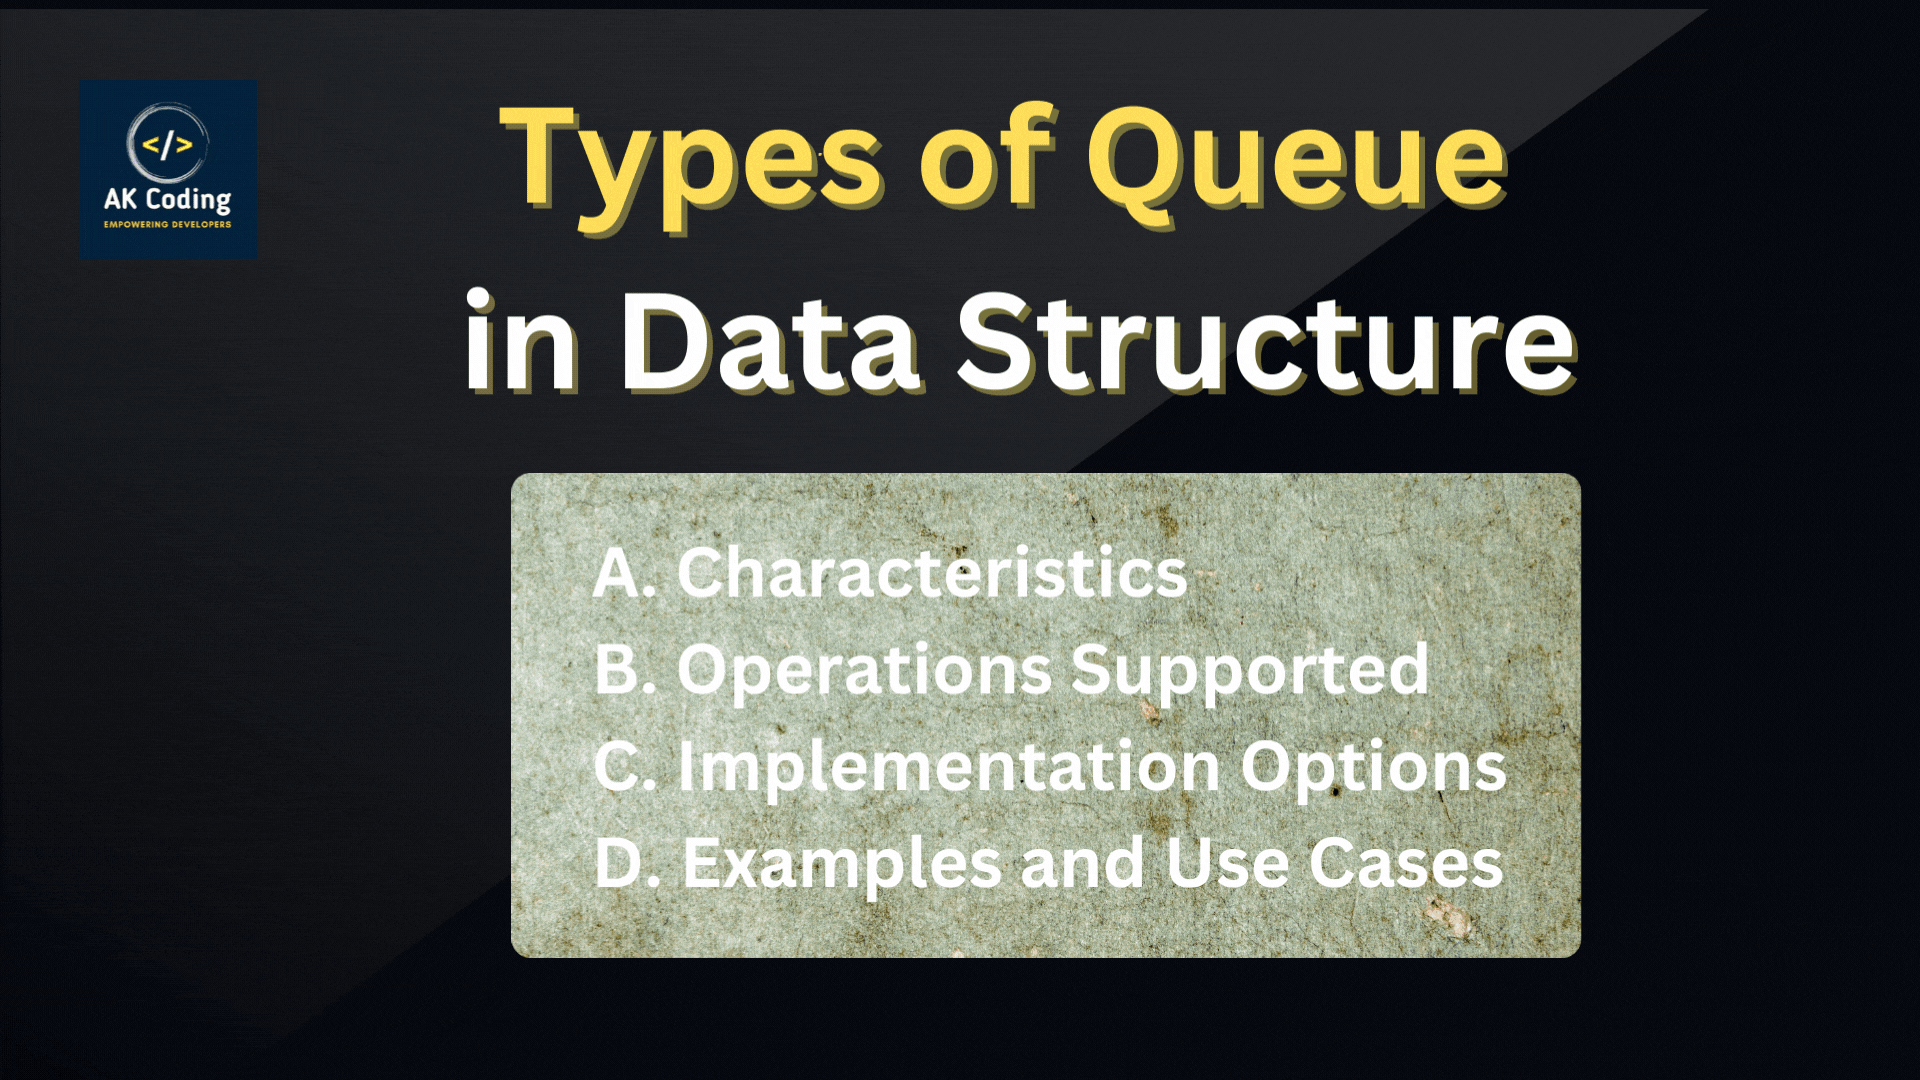 Types of queue in data structure